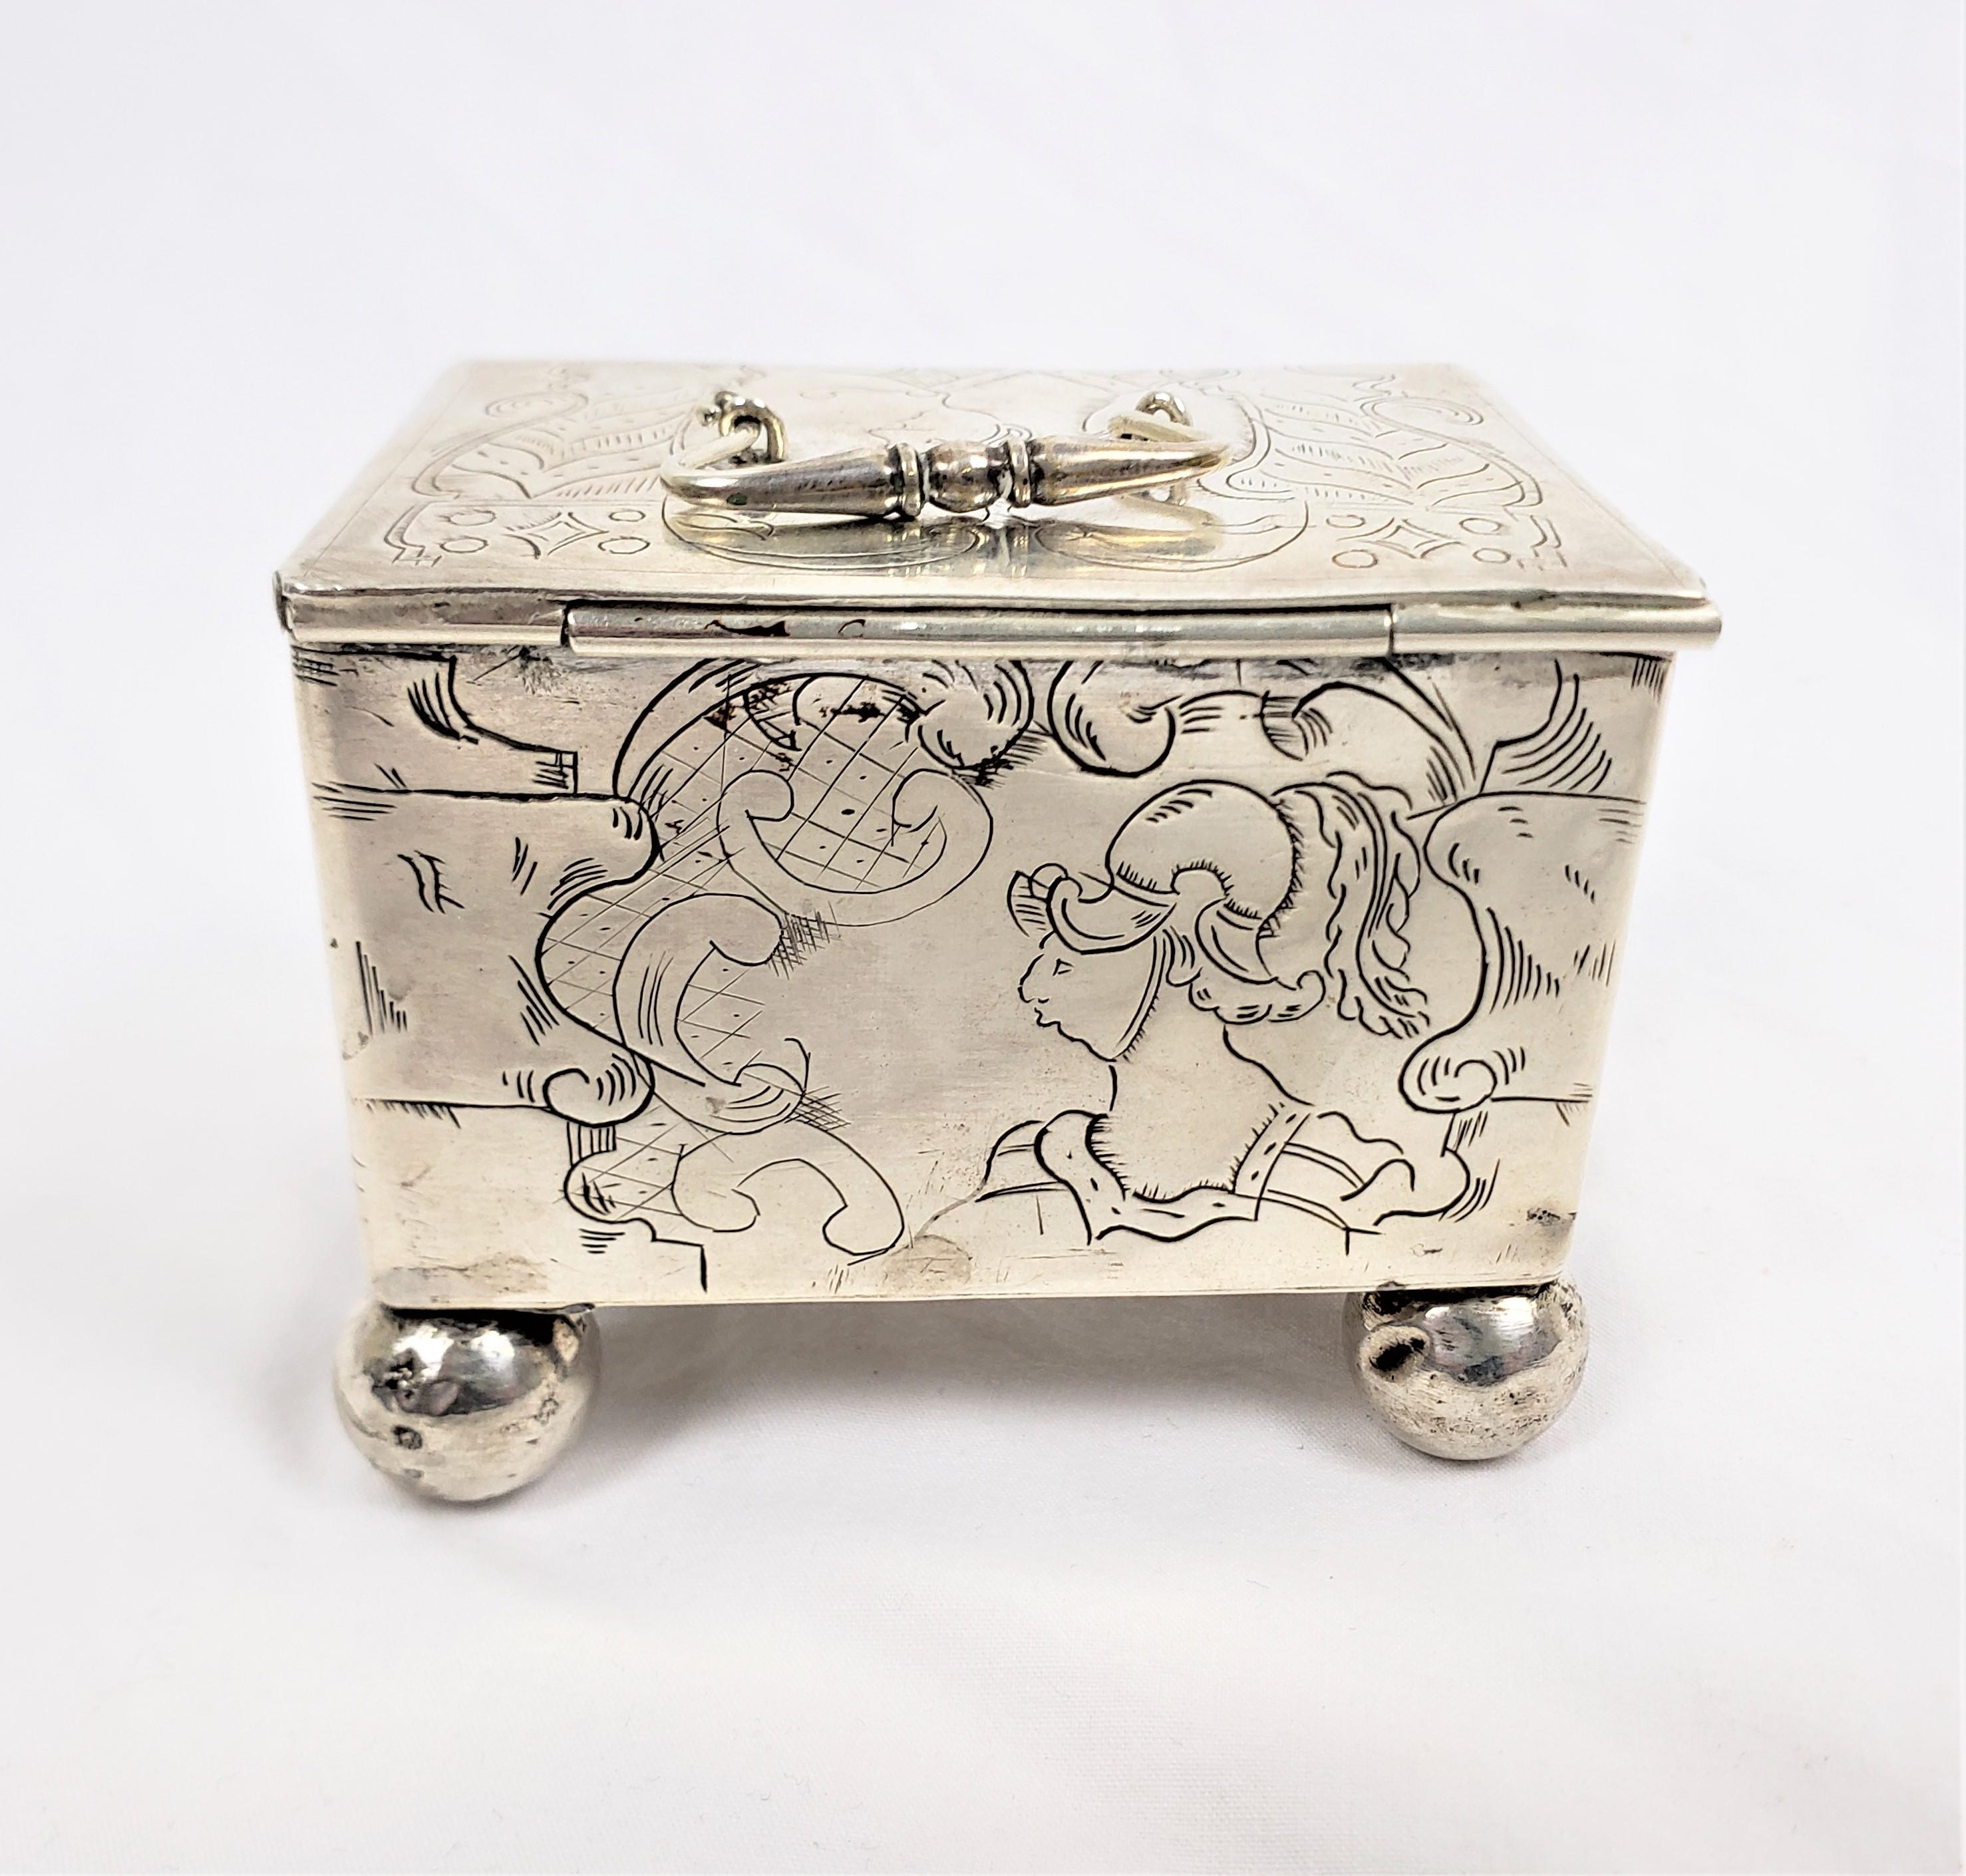 18th Century Antique Sterling Silver Dutch Marriage Box with Engraved Rococco Styled Figures For Sale